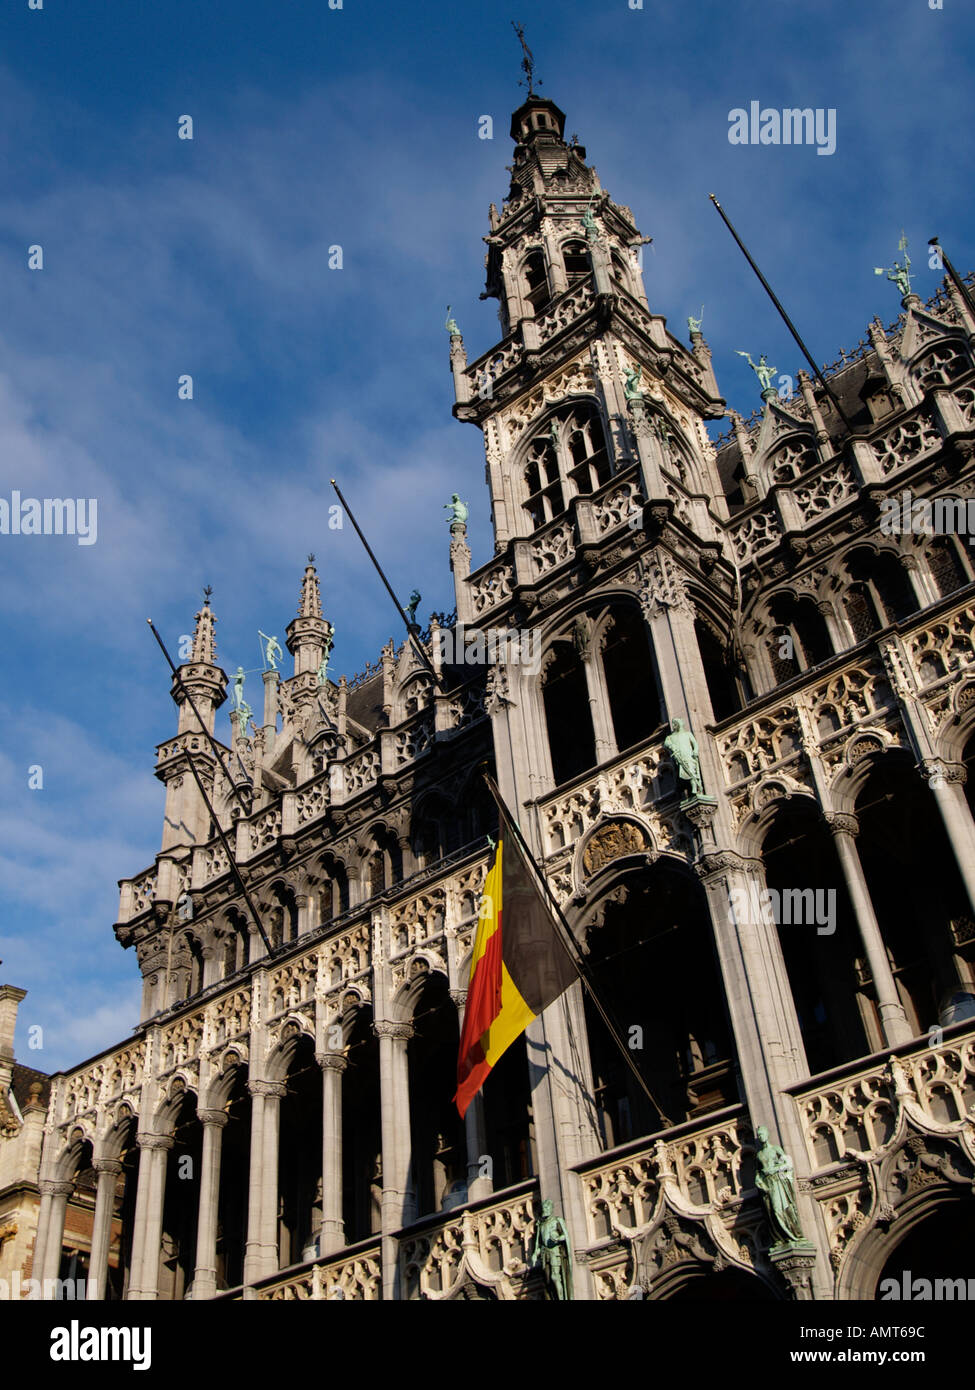 The Musee de la Ville museum on the Grand Place main square in Brussels Belgium Stock Photo